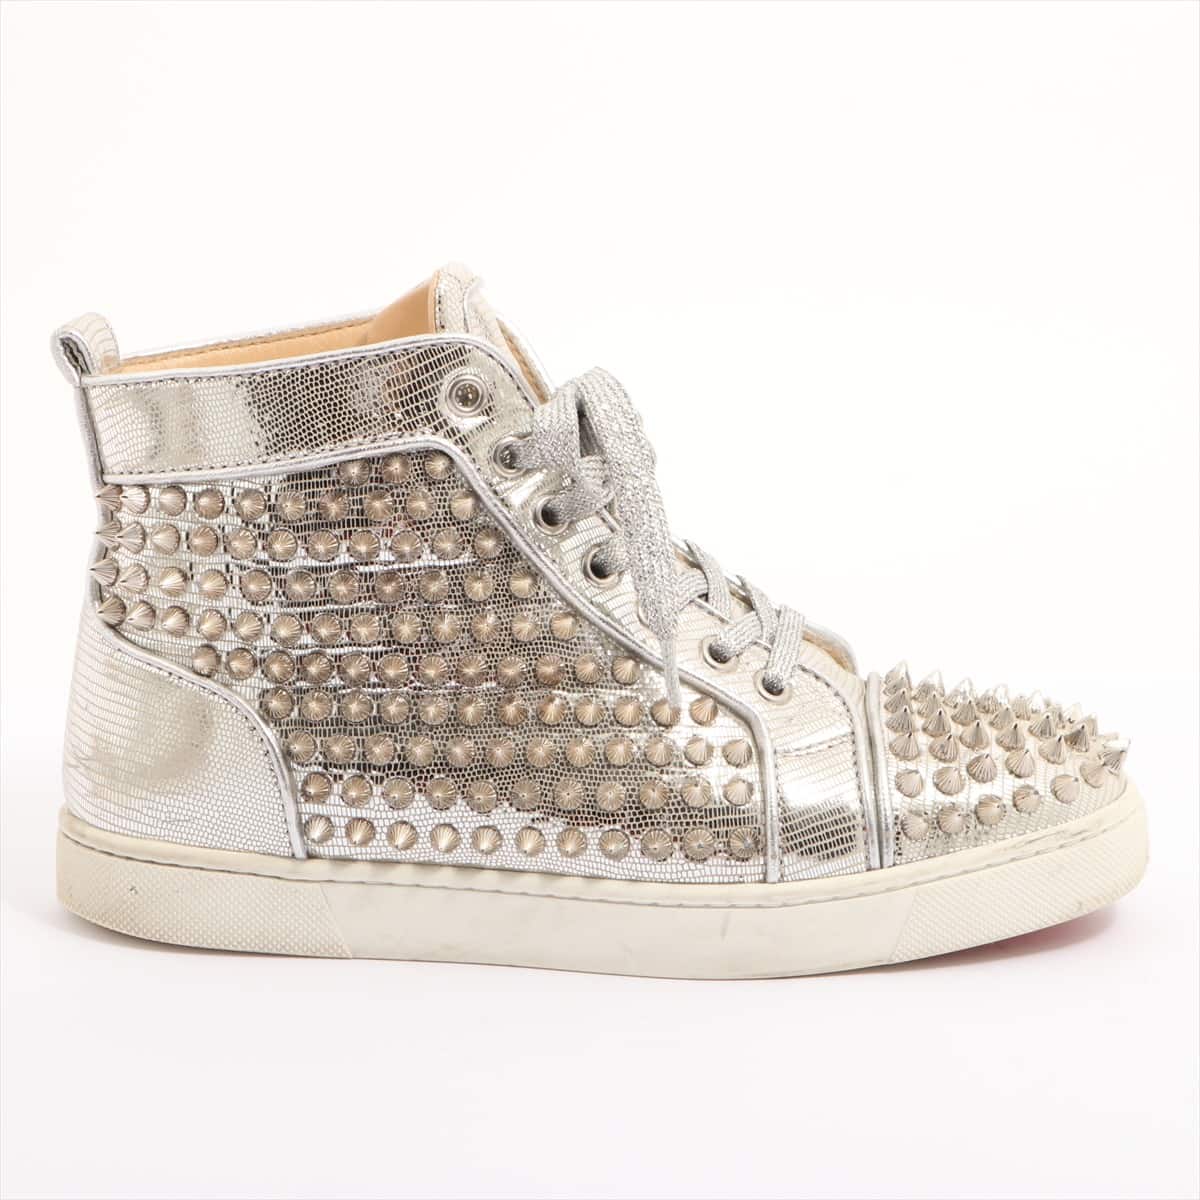 Christian Louboutin Lewis Spike Patent leather High-top Sneakers 36 1/2 Ladies' Silver